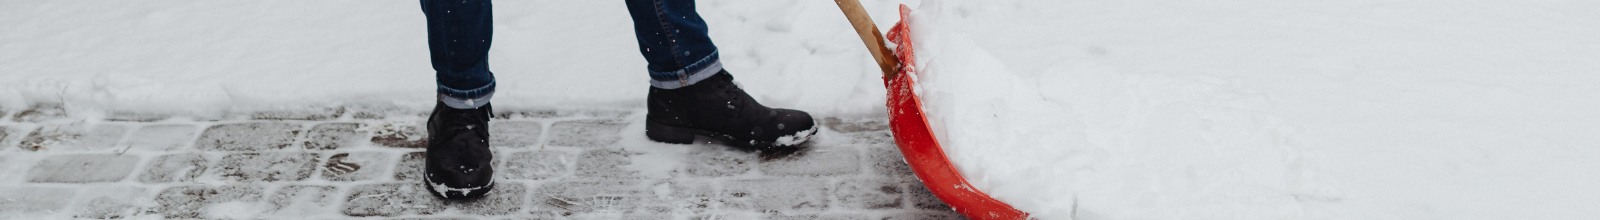 A person pushes snow with a shovel